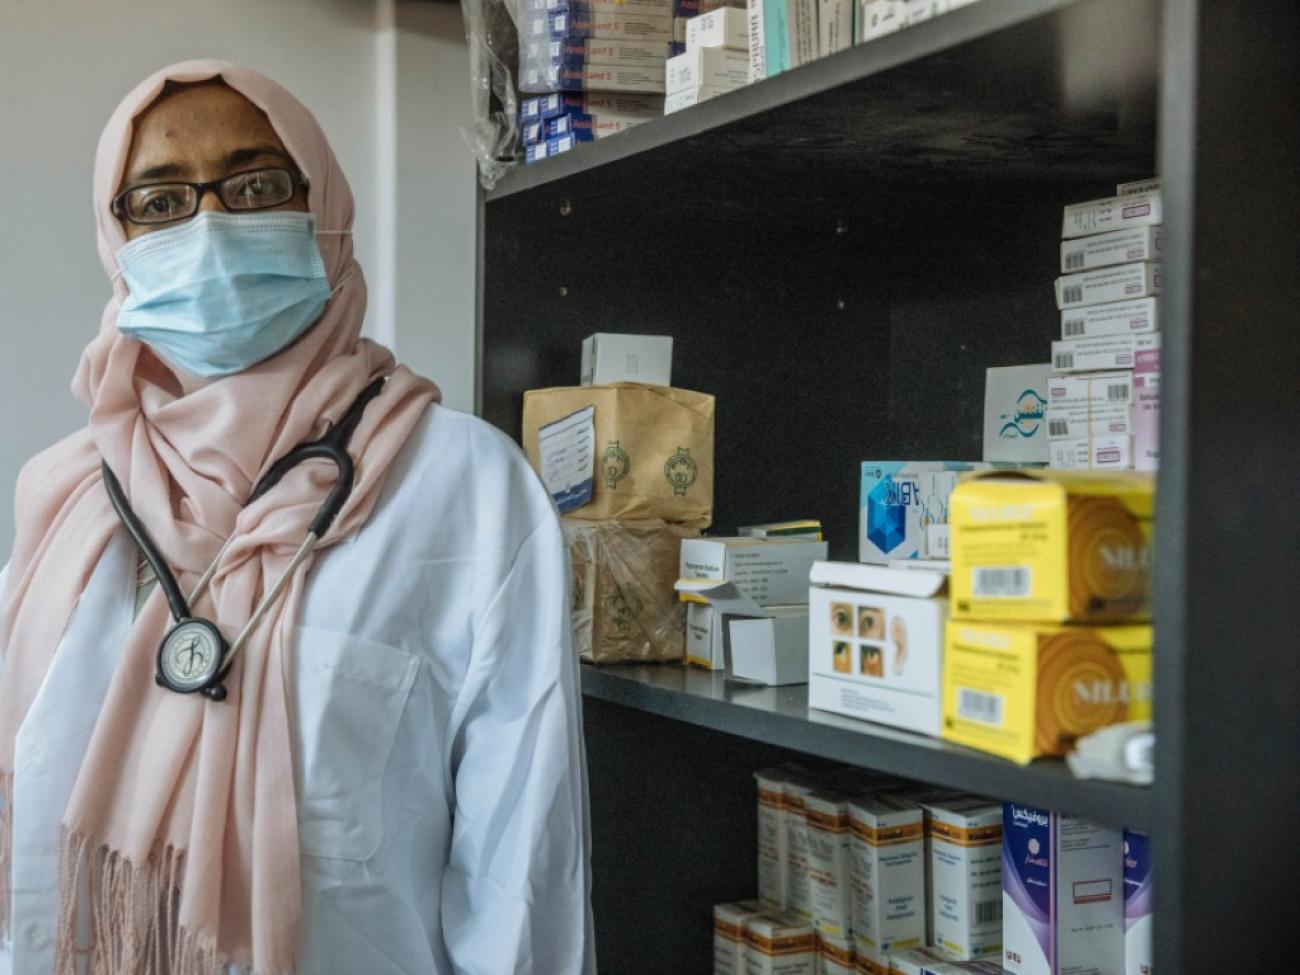 A network of care for migrants in Sudan